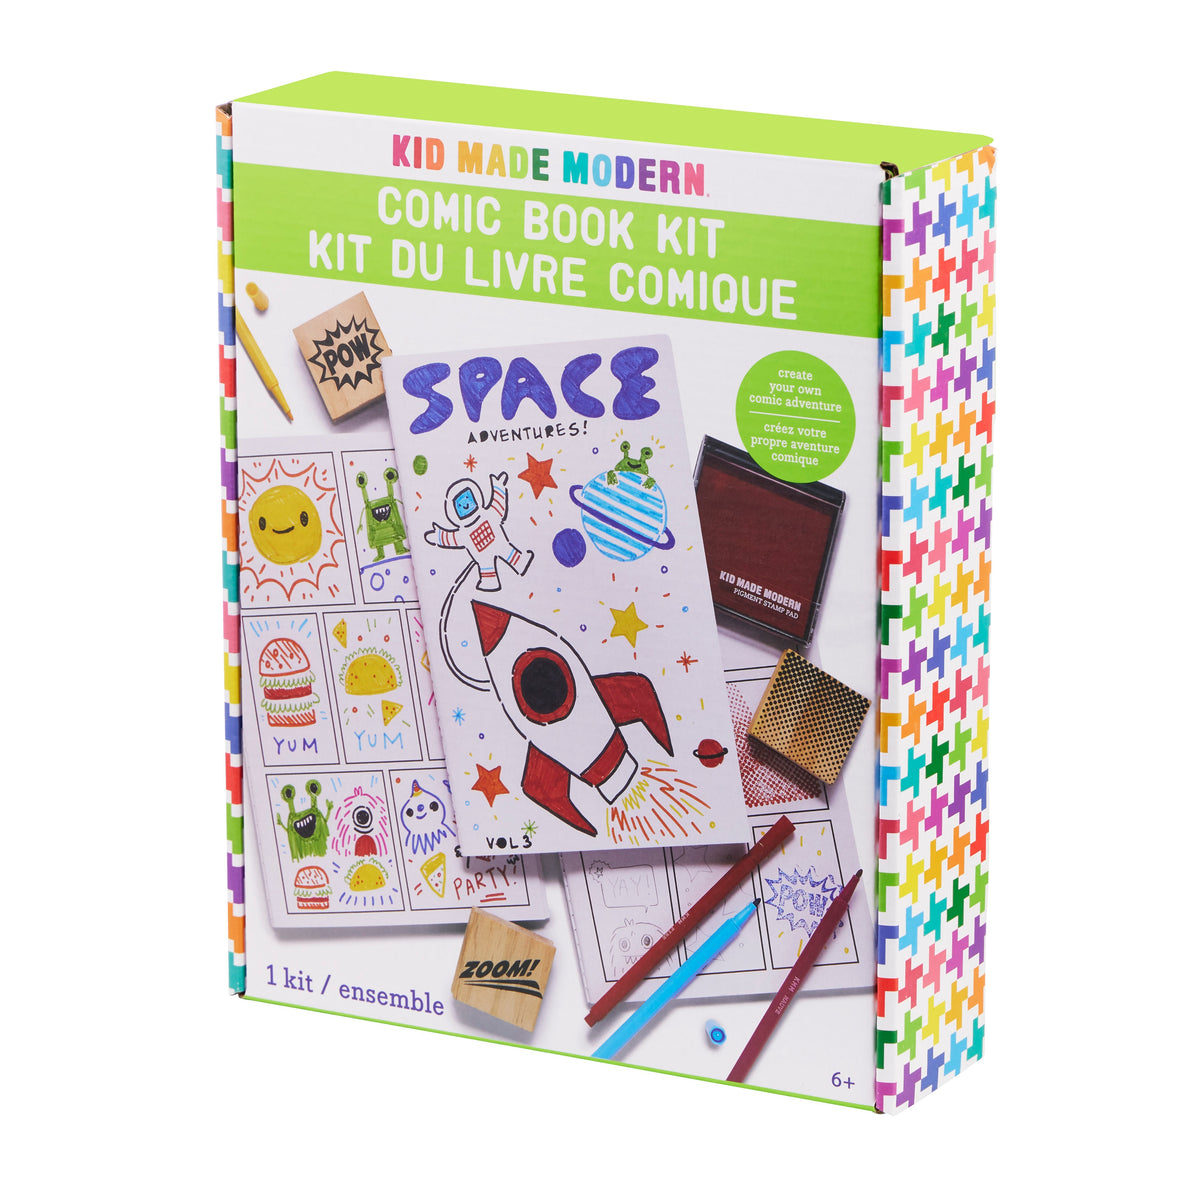 Create Your Own Comic Book Kit for Kids Canada